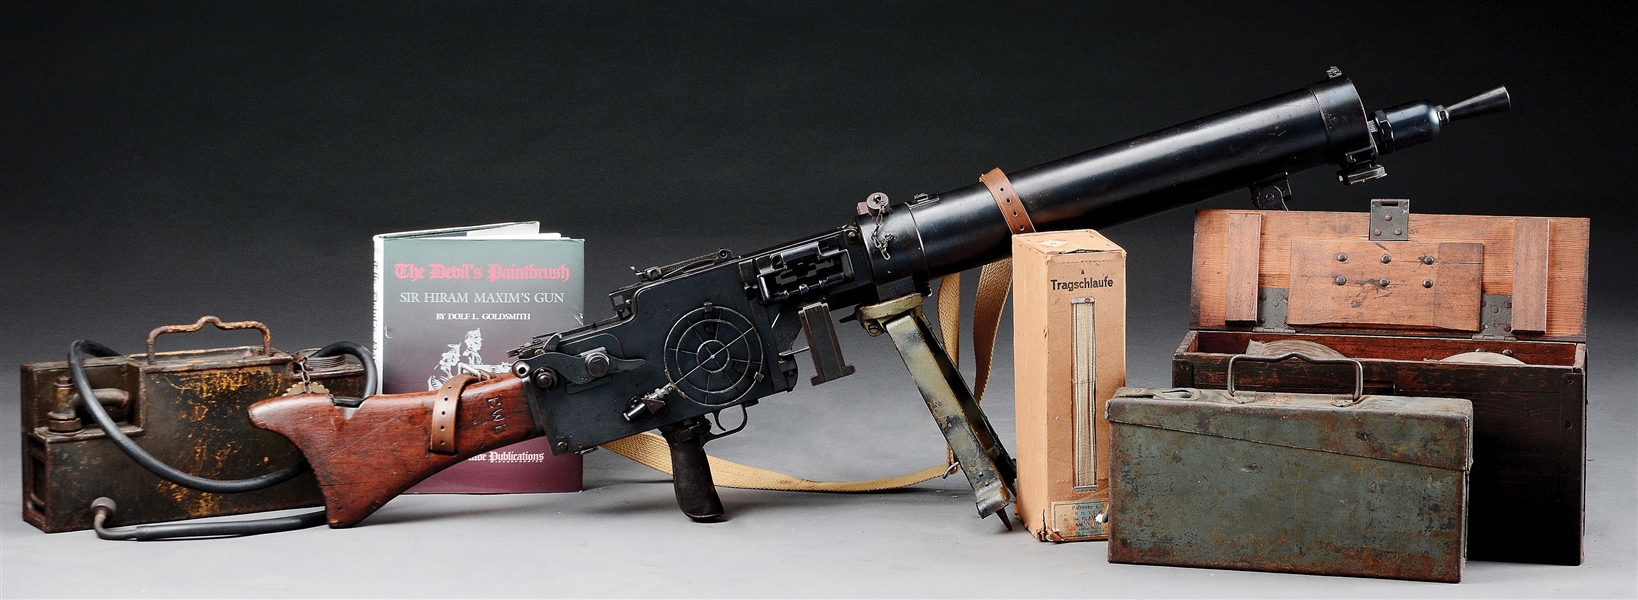 (N) FANTASTIC AND EXTRAORDINARILY RARE GERMAN WW1 MG 08/15 MAXIM MACHINE GUN RETROFITTED DURING WEIMAR ERA WITH SPECIAL FEED BLOCK EQUIPPED TO MG 34 OR CLOTH BELTS (CURIO AND RELIC)